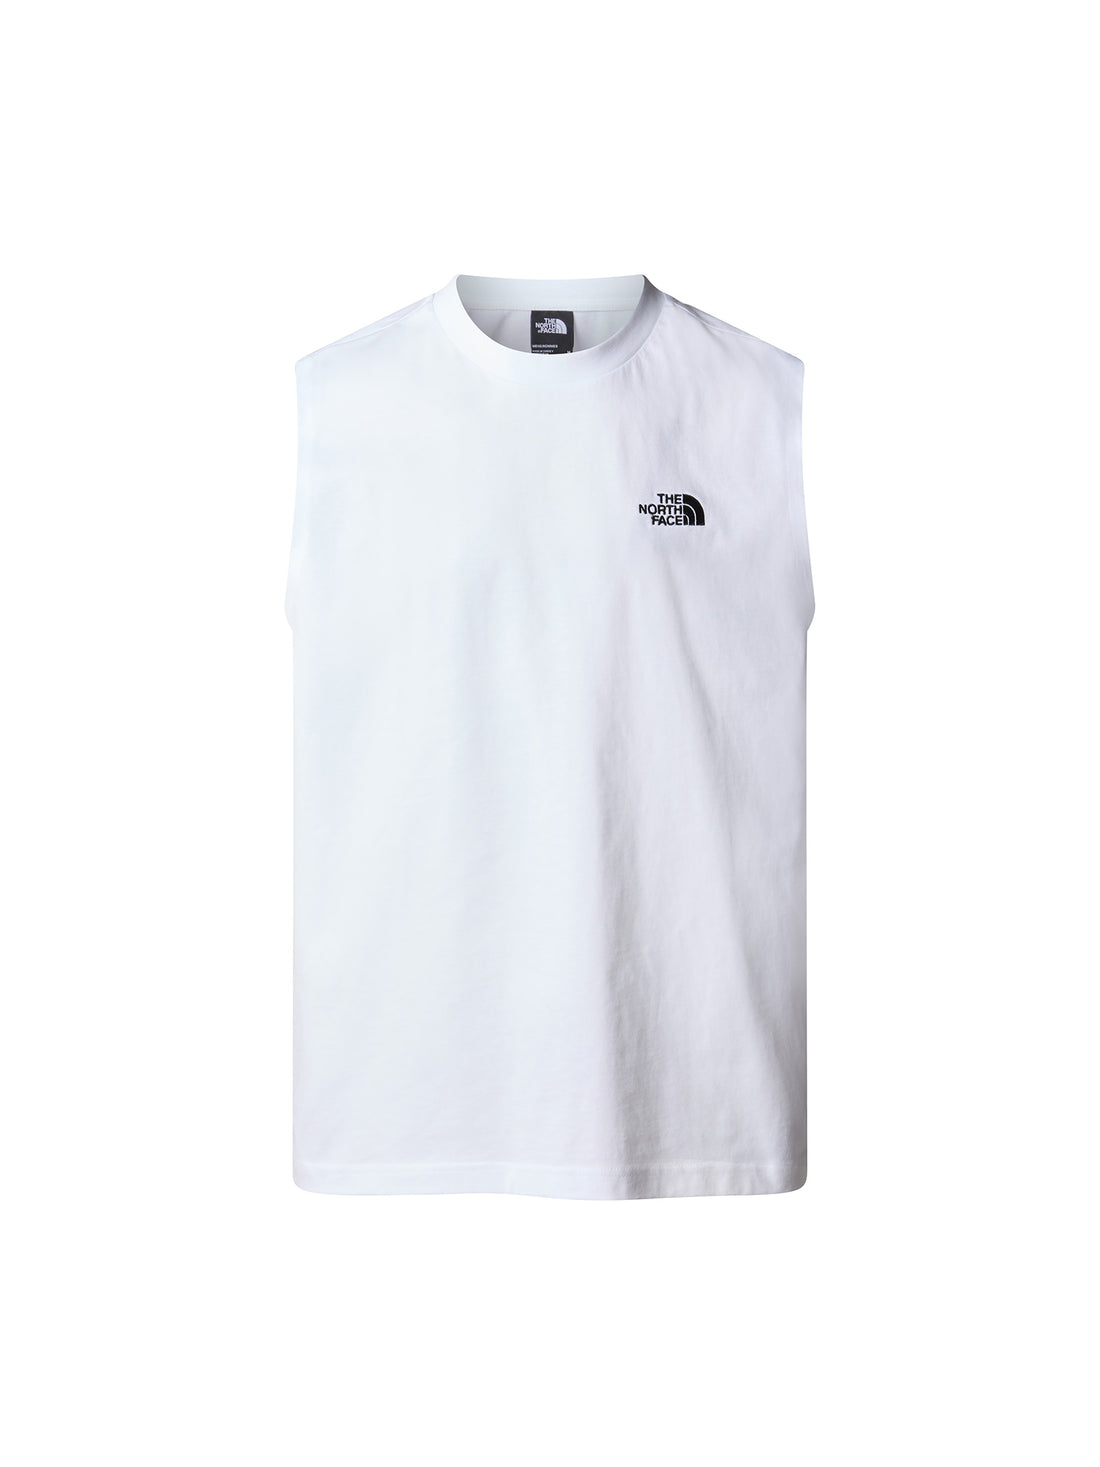 Canotte Bianco The North Face